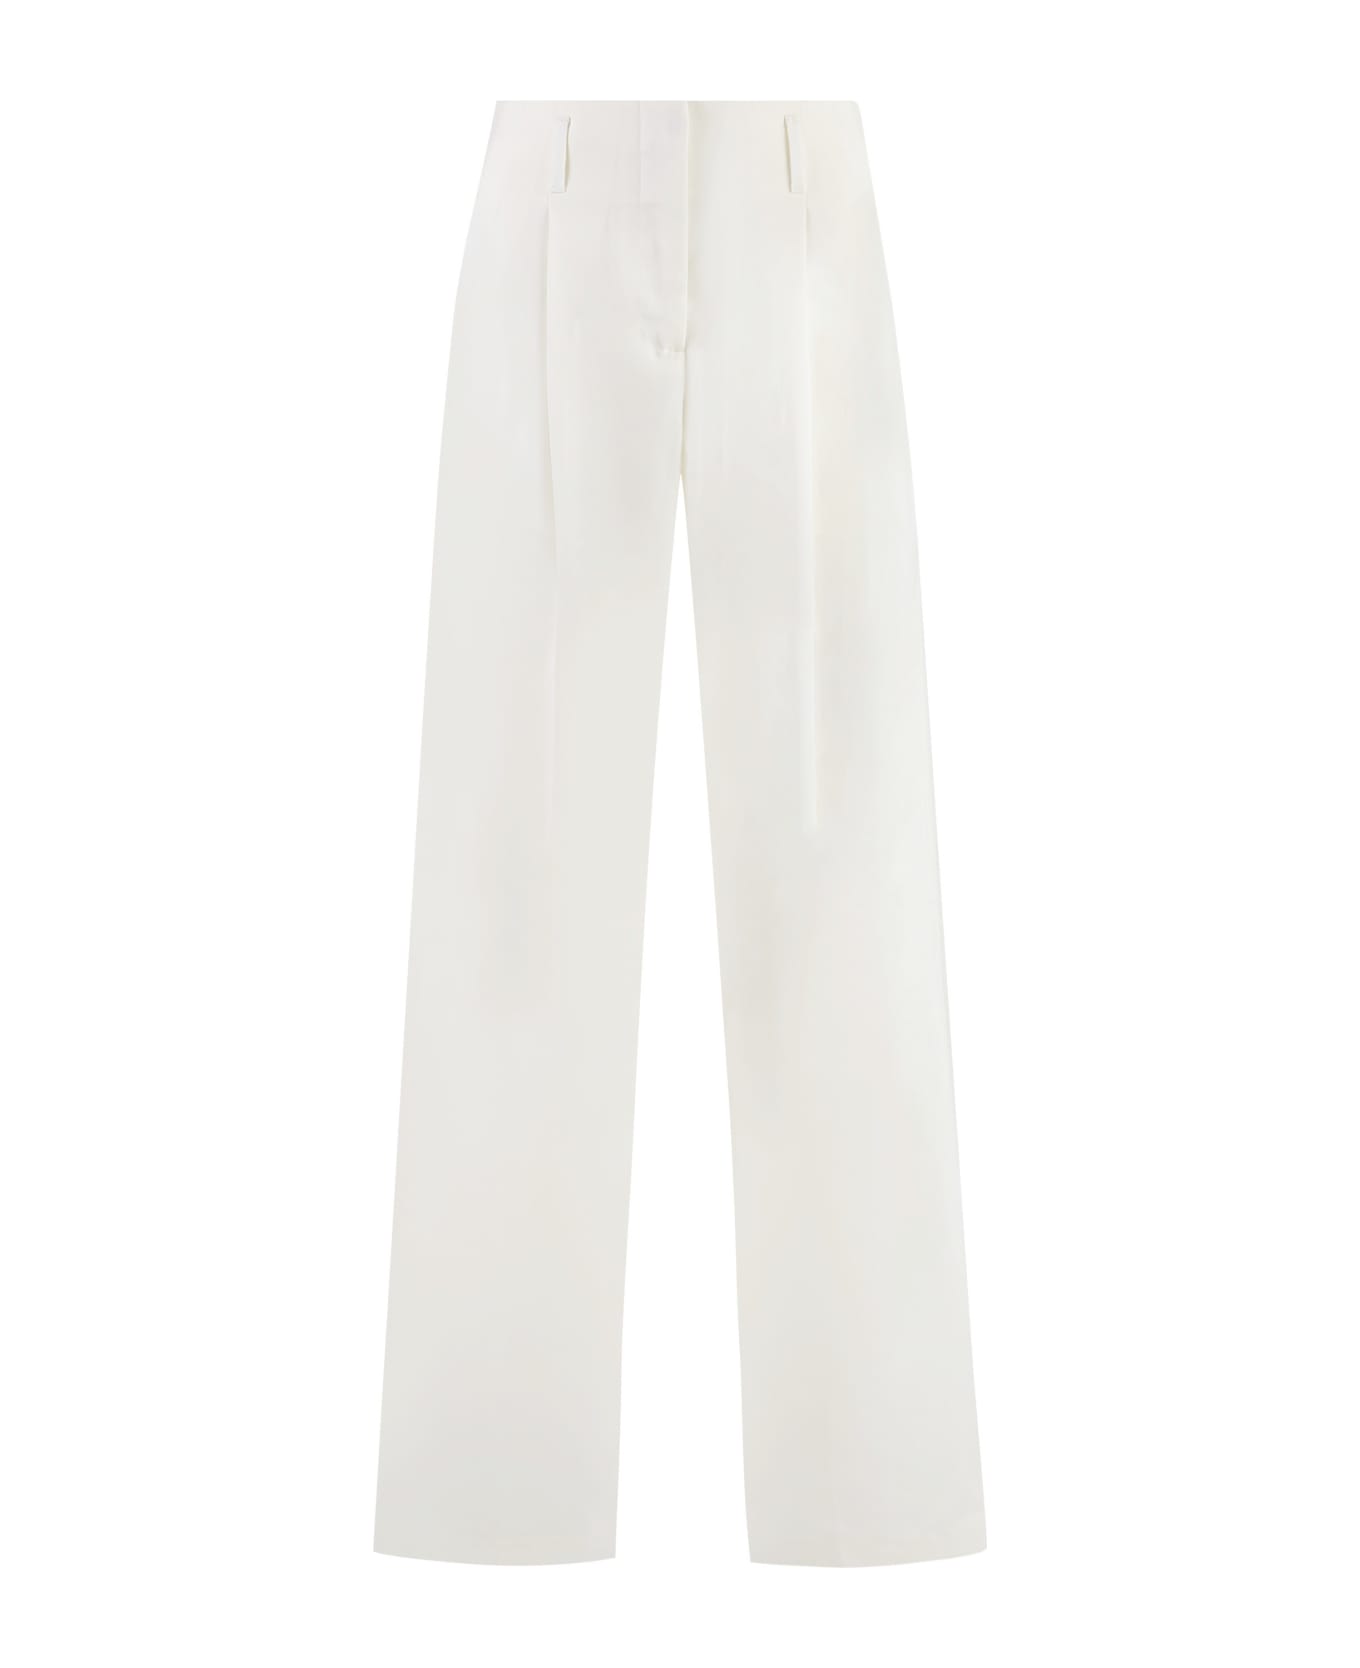 Golden Goose Flavia Wool Blend Trousers - Ivory